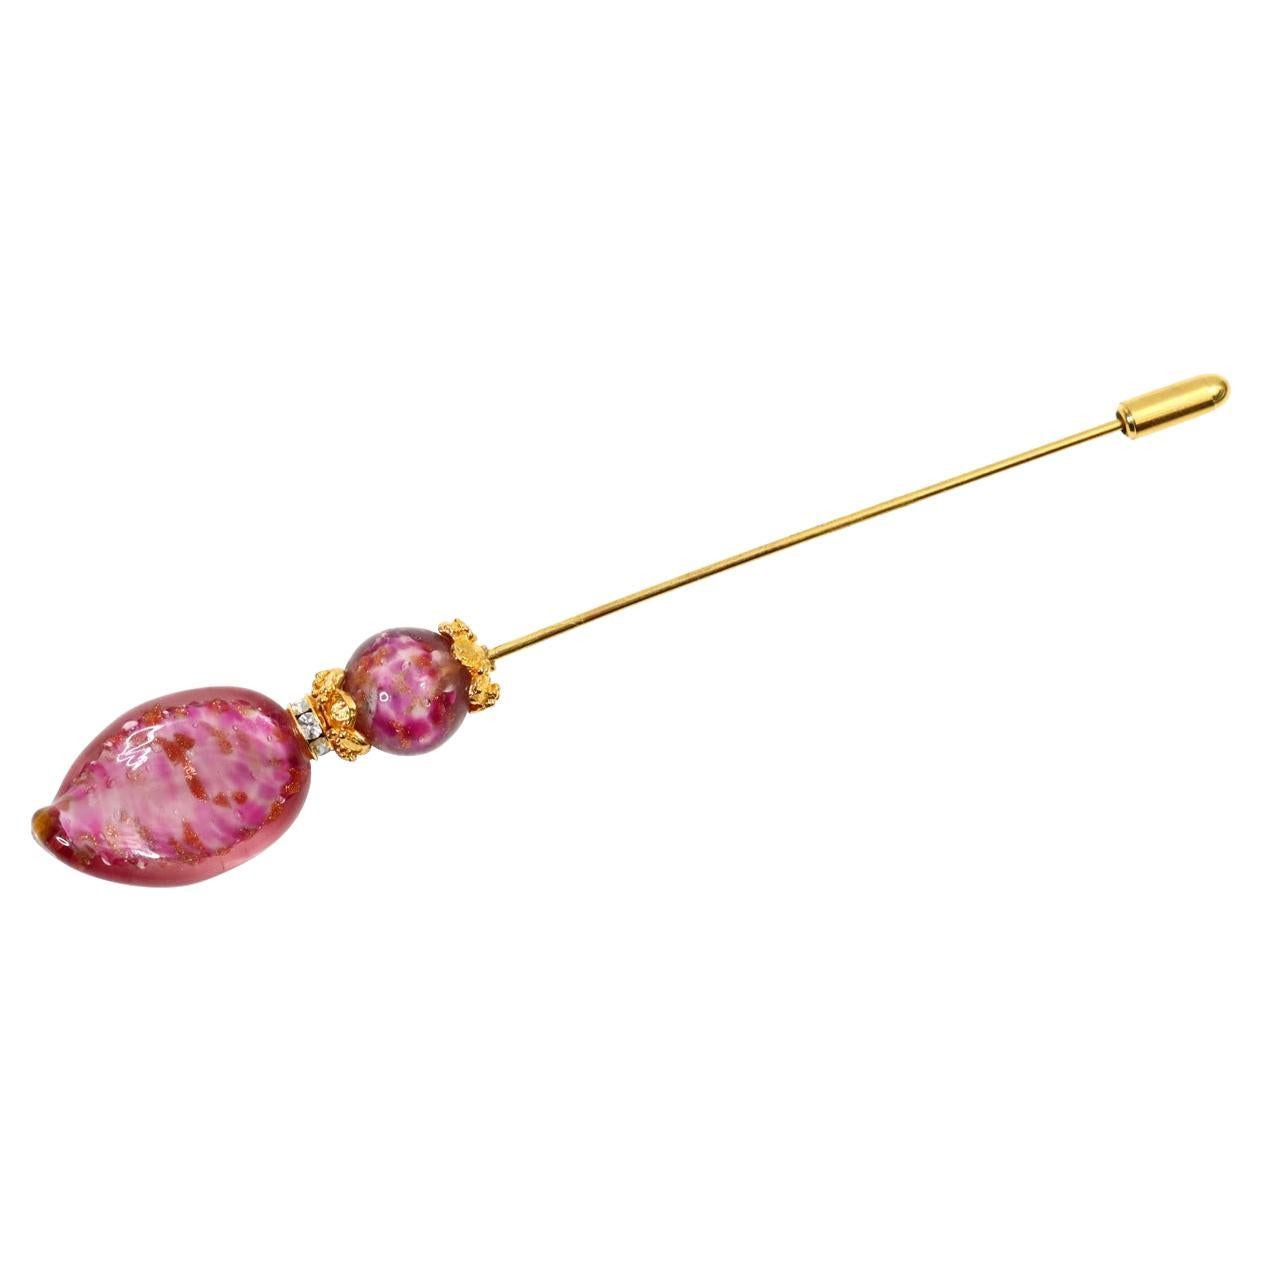 Vintage Pink Stone with Diamante in Gold Tone Lapel Pin Brooch, circa 1990s For Sale